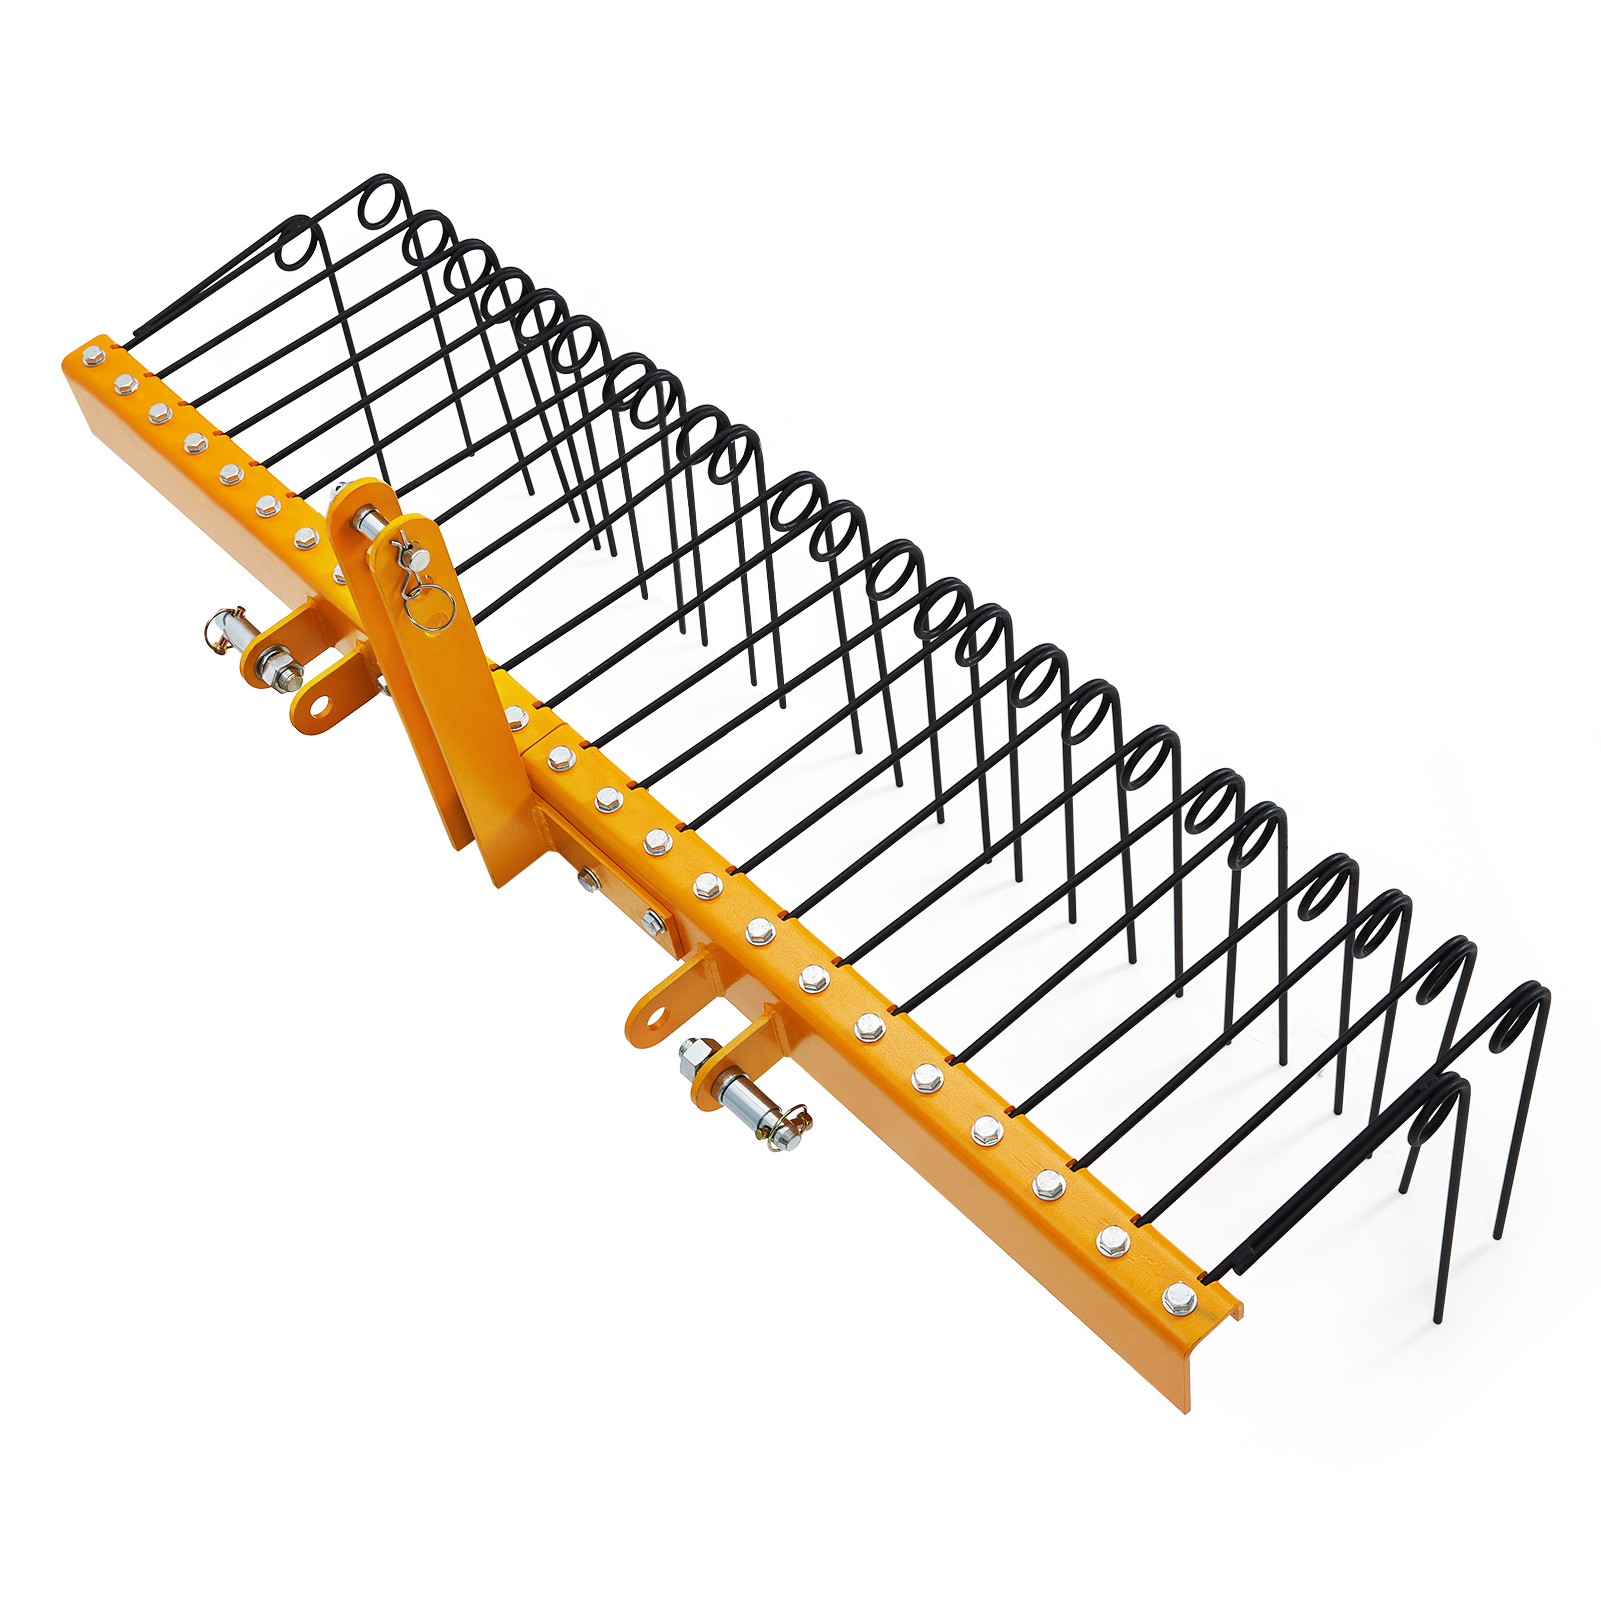 60 Inch Pine Straw Rake, 26 Coil Spring Tines Durab le Powder Coated ...